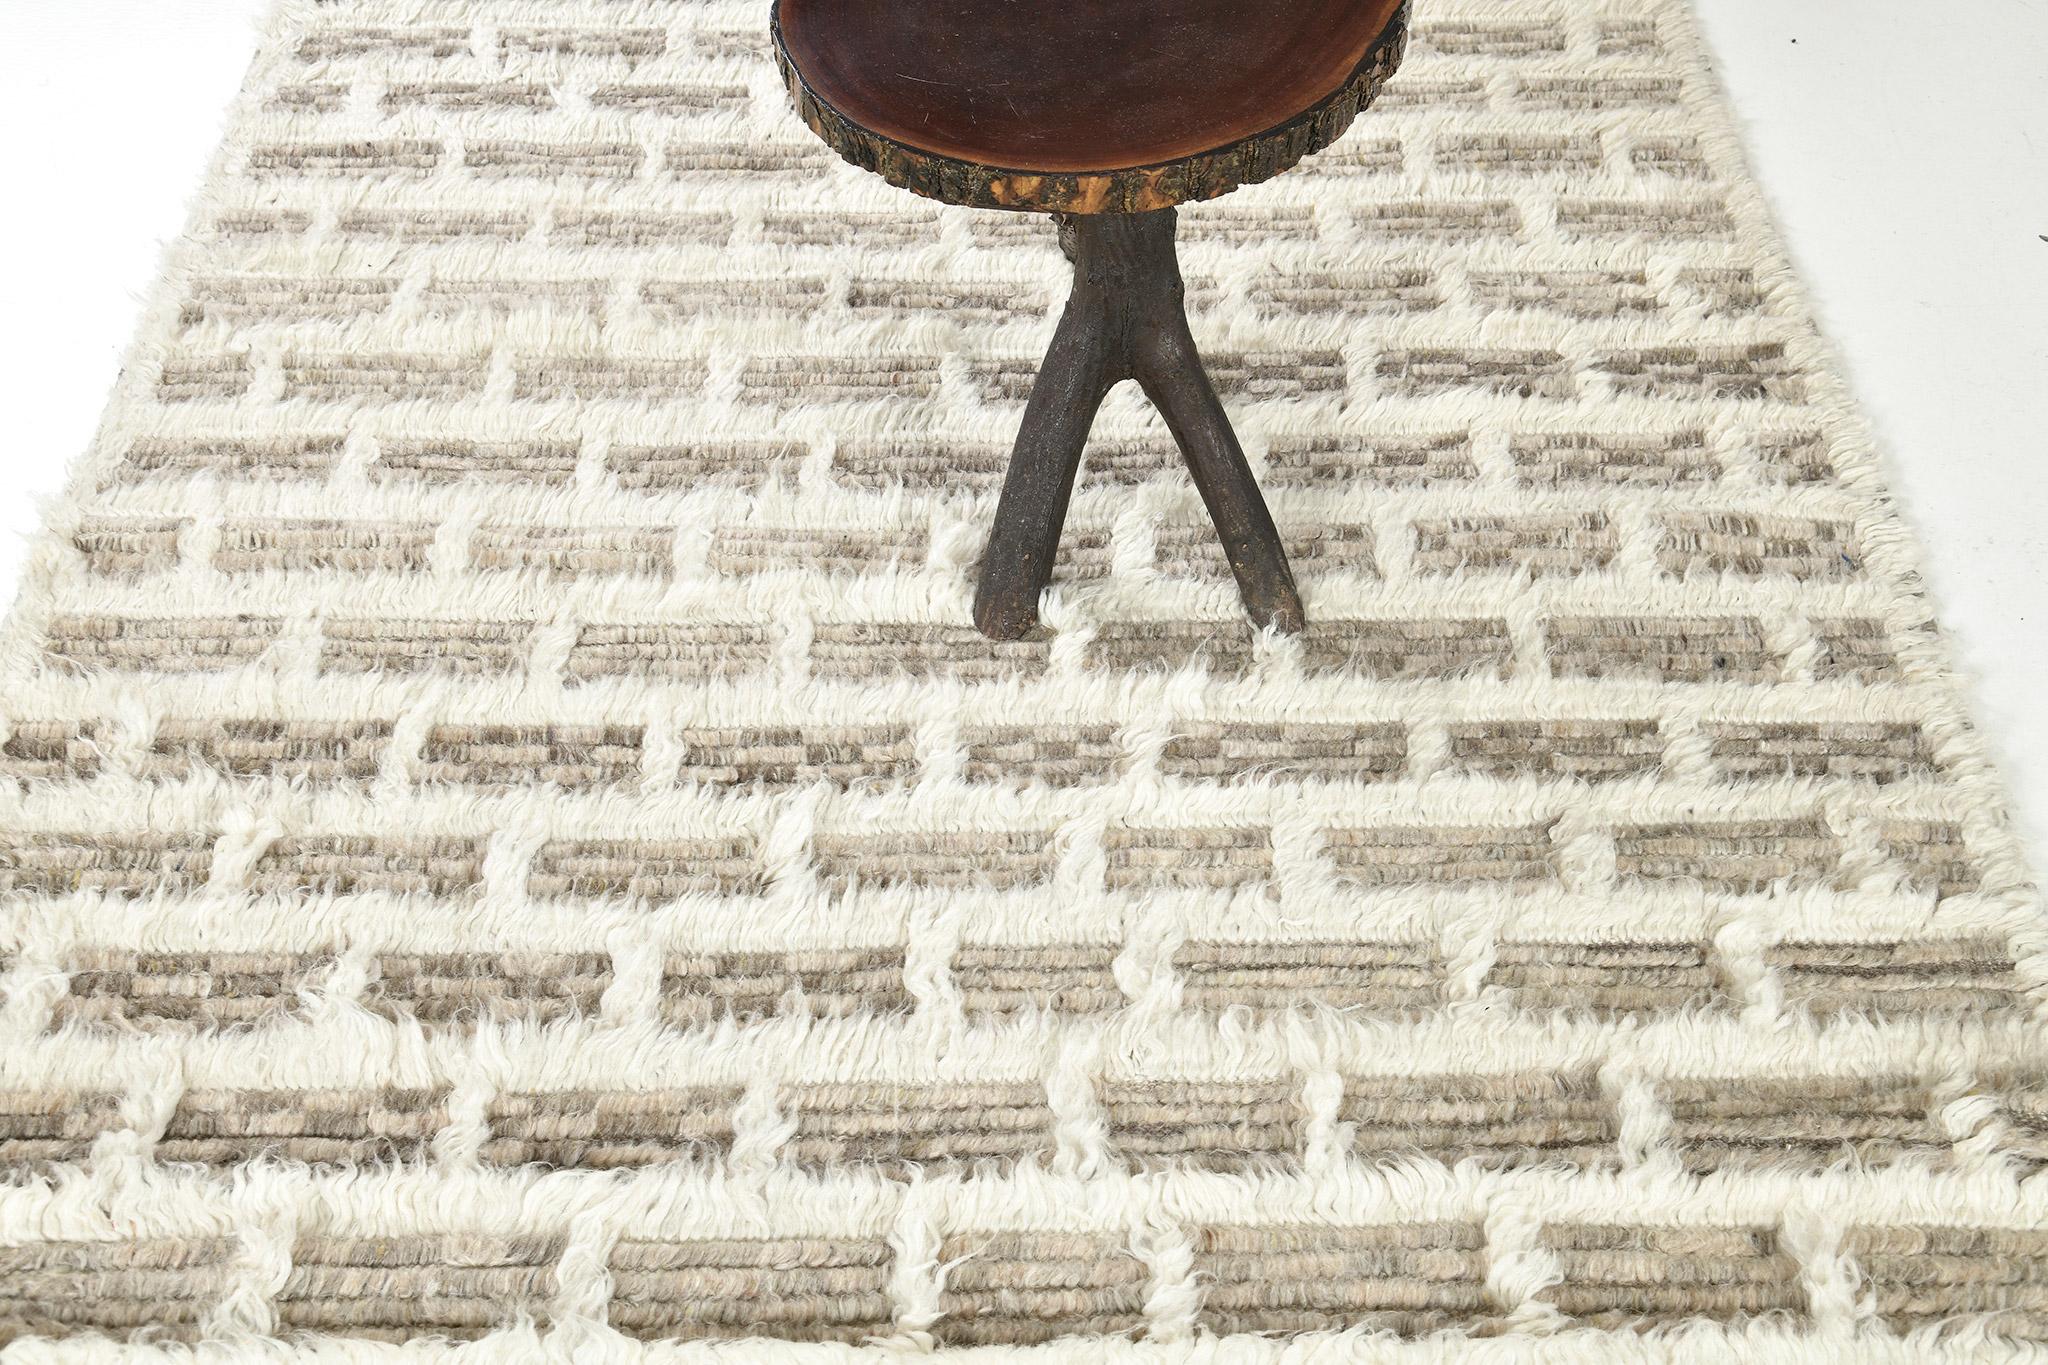 In the Ahina rug, a rectangular grid frames a field of dappled pile tones. This piece combines ivory lines with heathered clay and taupe tones. 

Hand knotted of hand-spun wool, the Sahara Collection melds linear organization with a relaxed organic